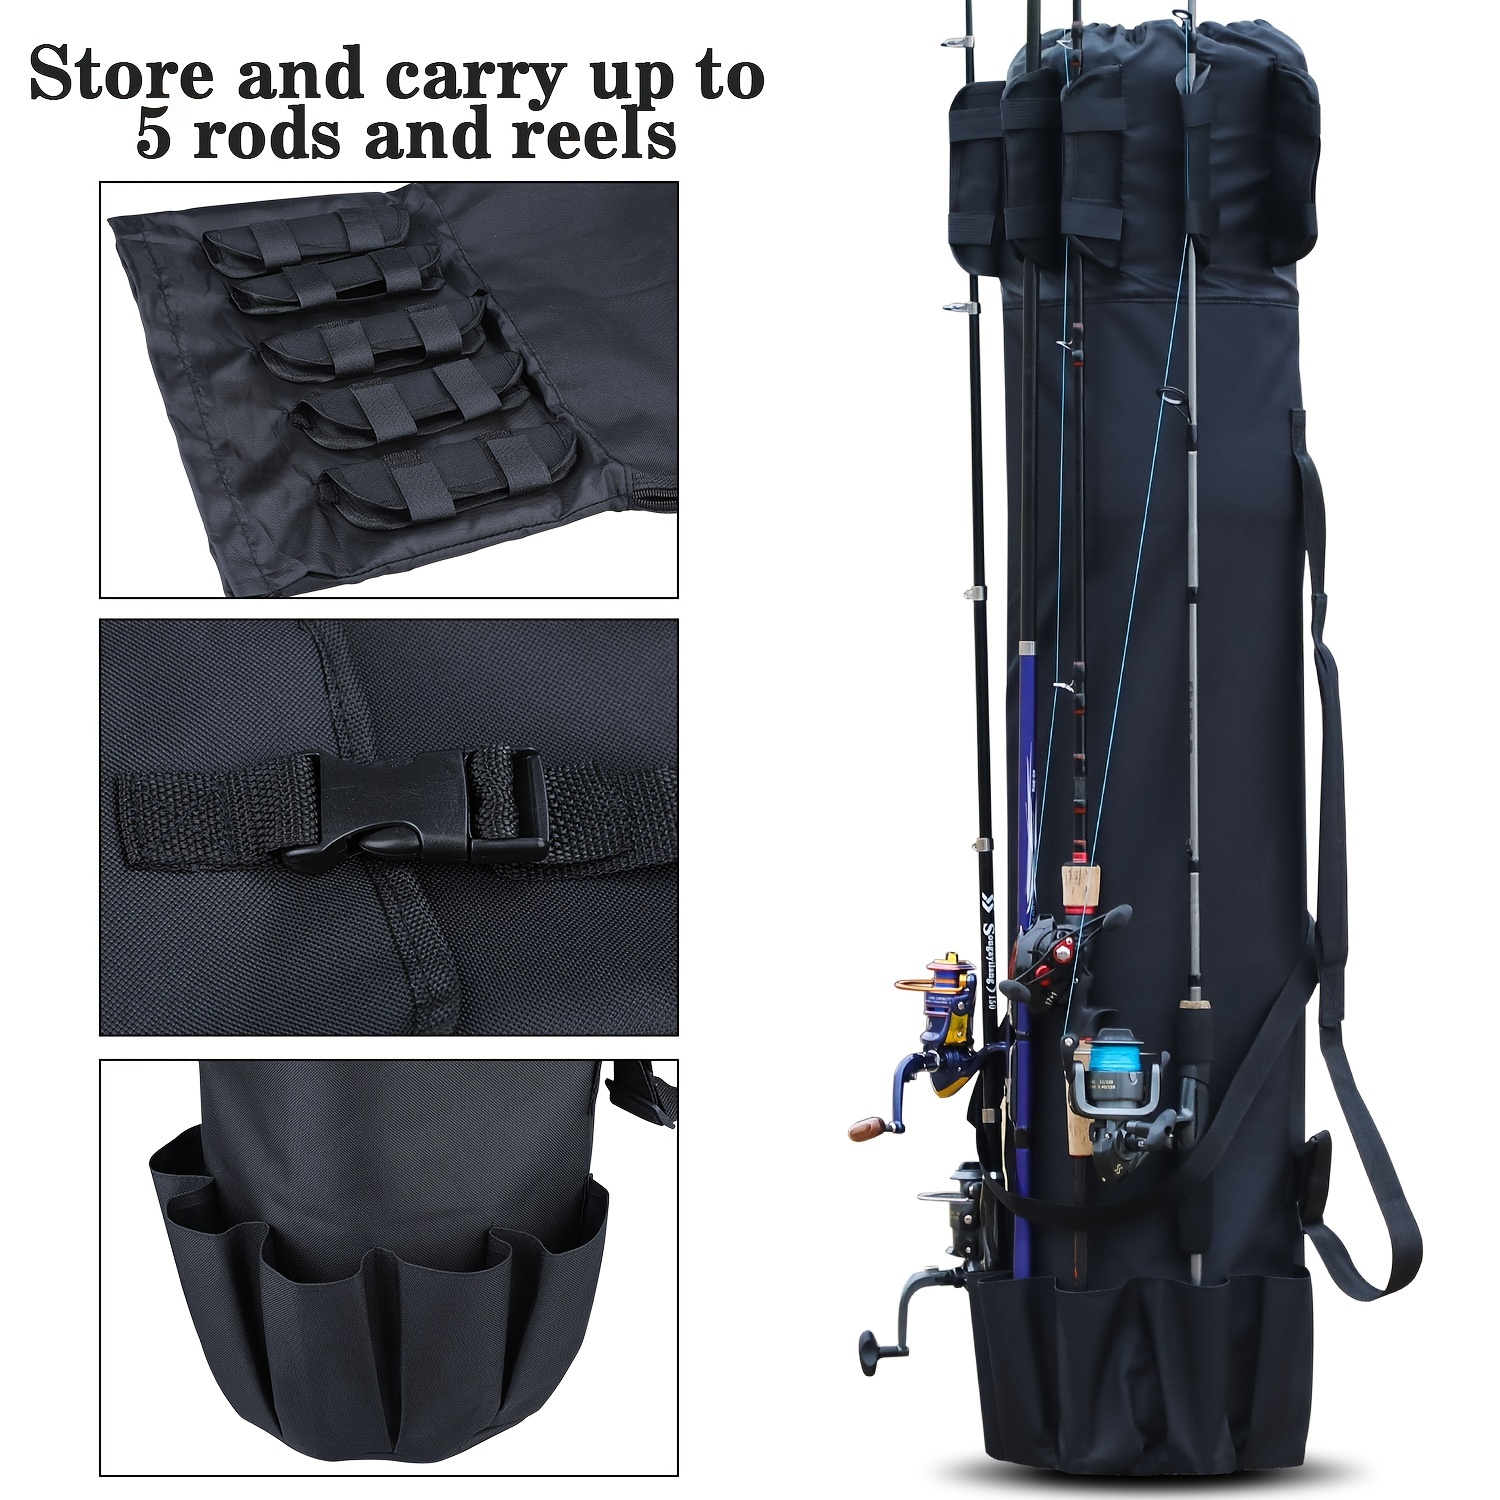 Fishing Rod Holdall, Holder, Bag, Carry Case, Luggage for made up rods with  reels - 120cm / 47in